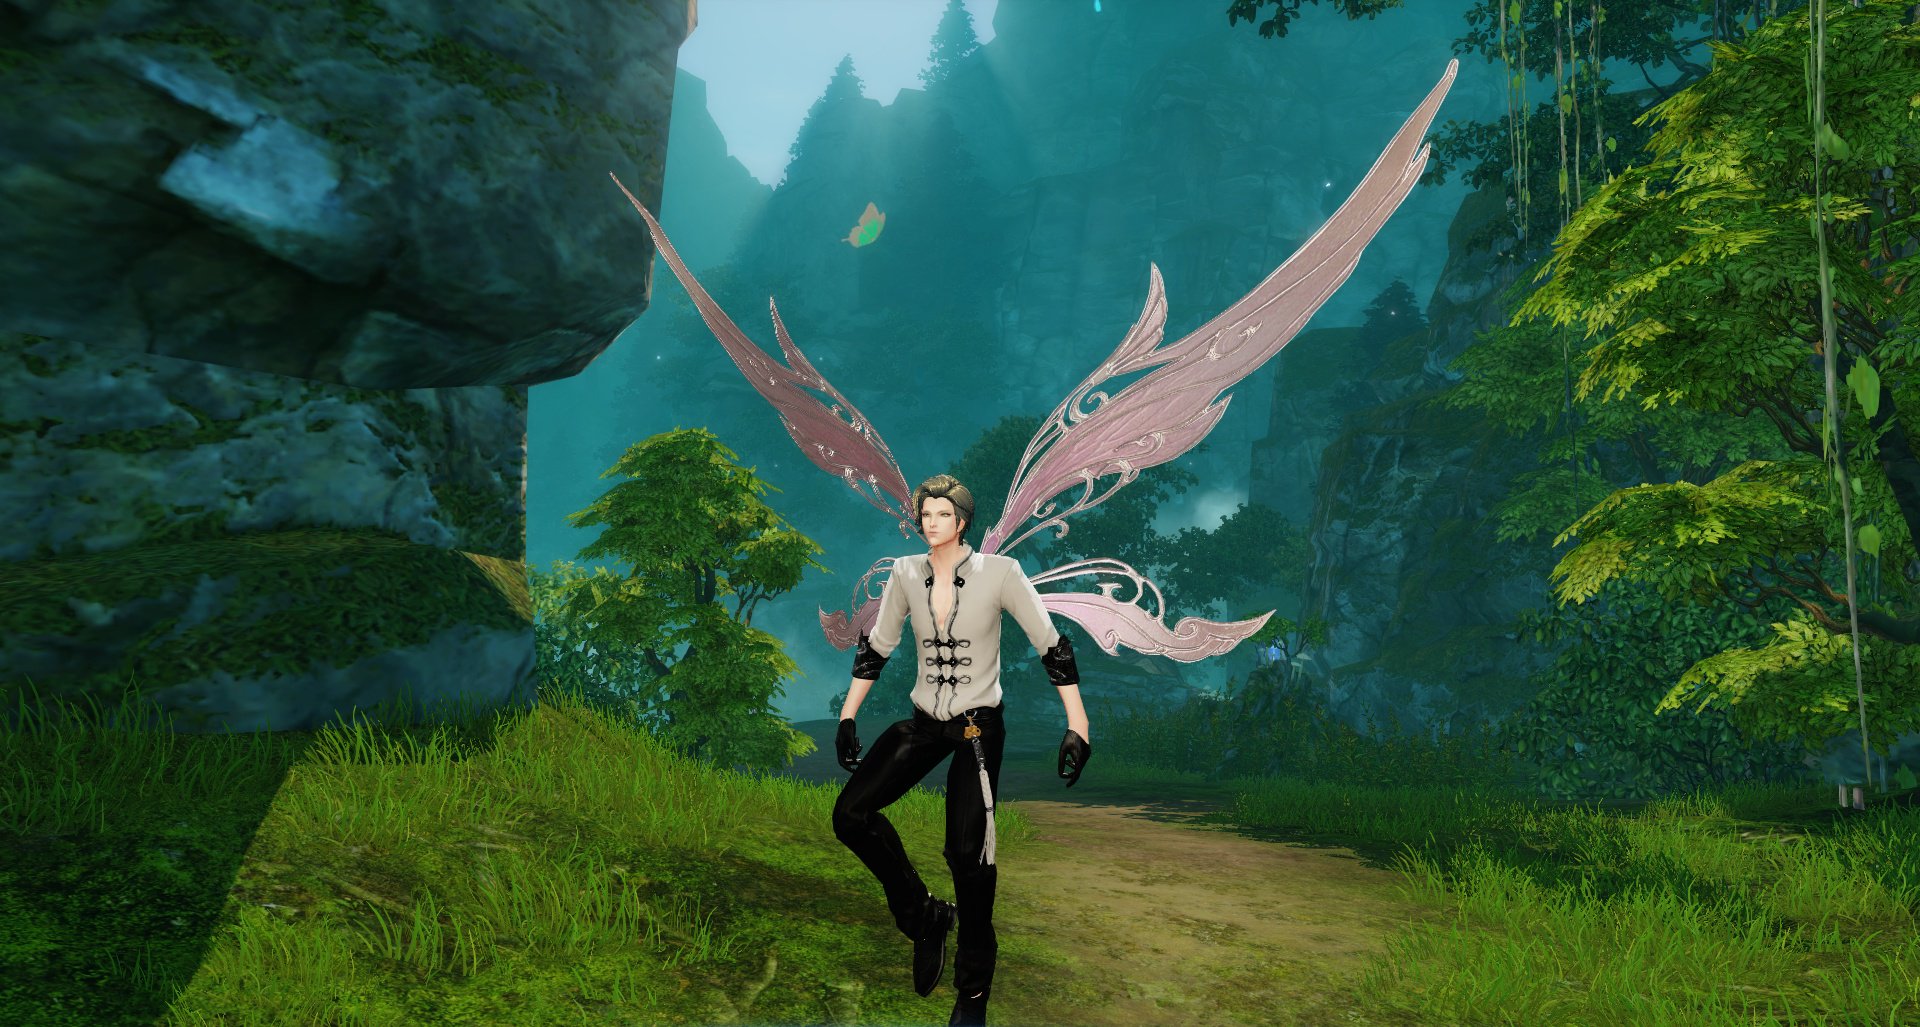 Revelation Online On Twitter Soar High In The Sky With Your New Wings From Our Exclusive Web Shop Offer Https T Co Tiz9l6nsu8